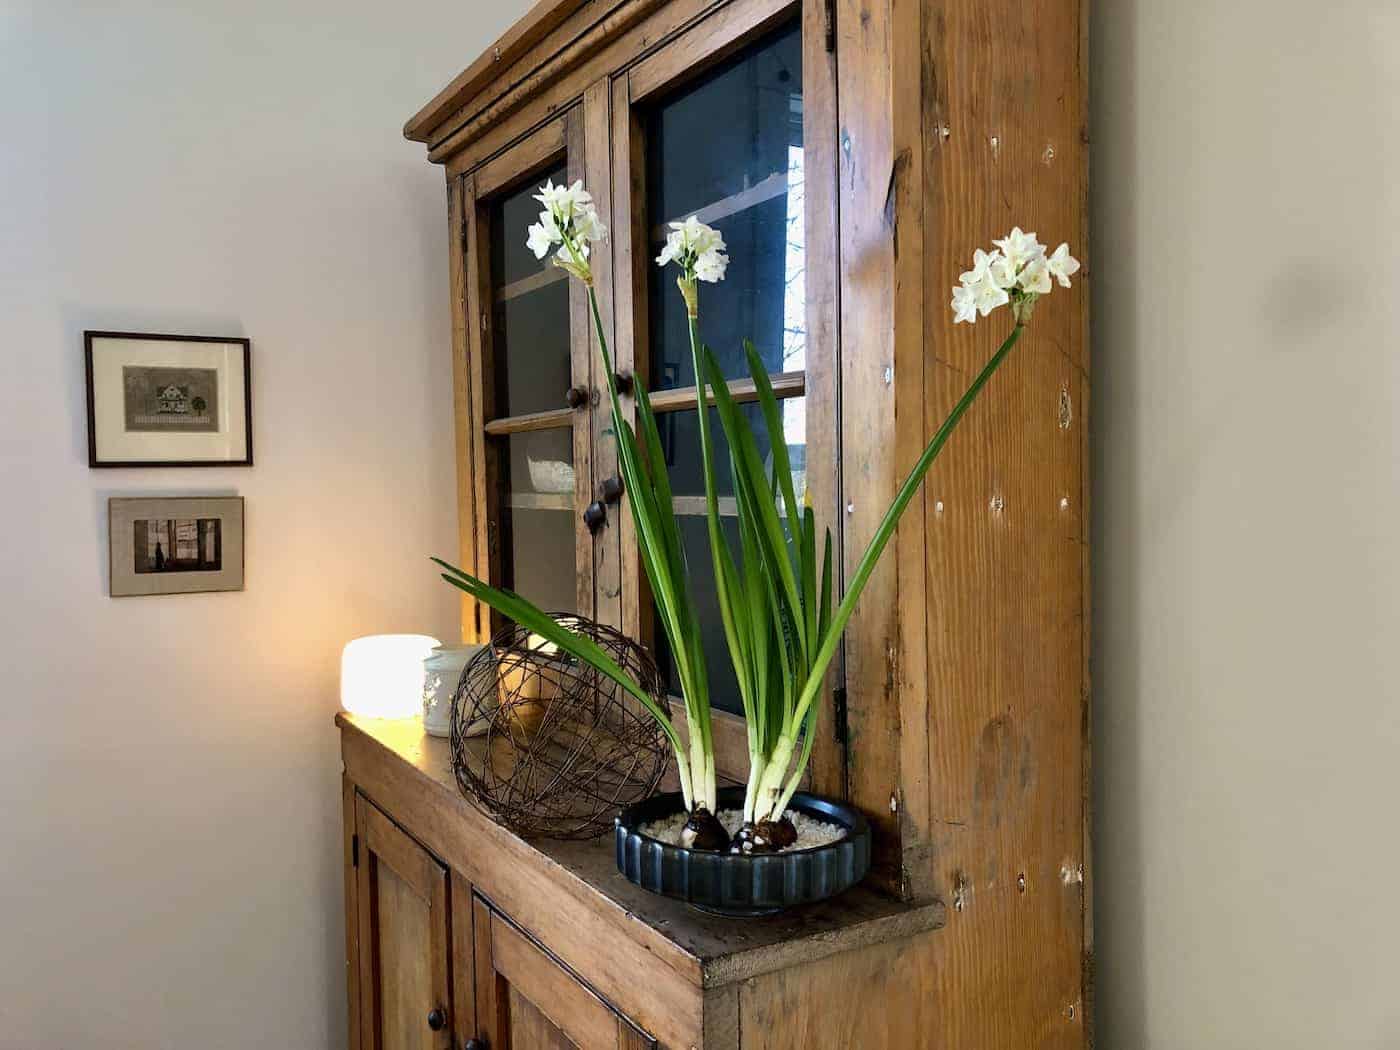 Paperwhites falling over as they flower